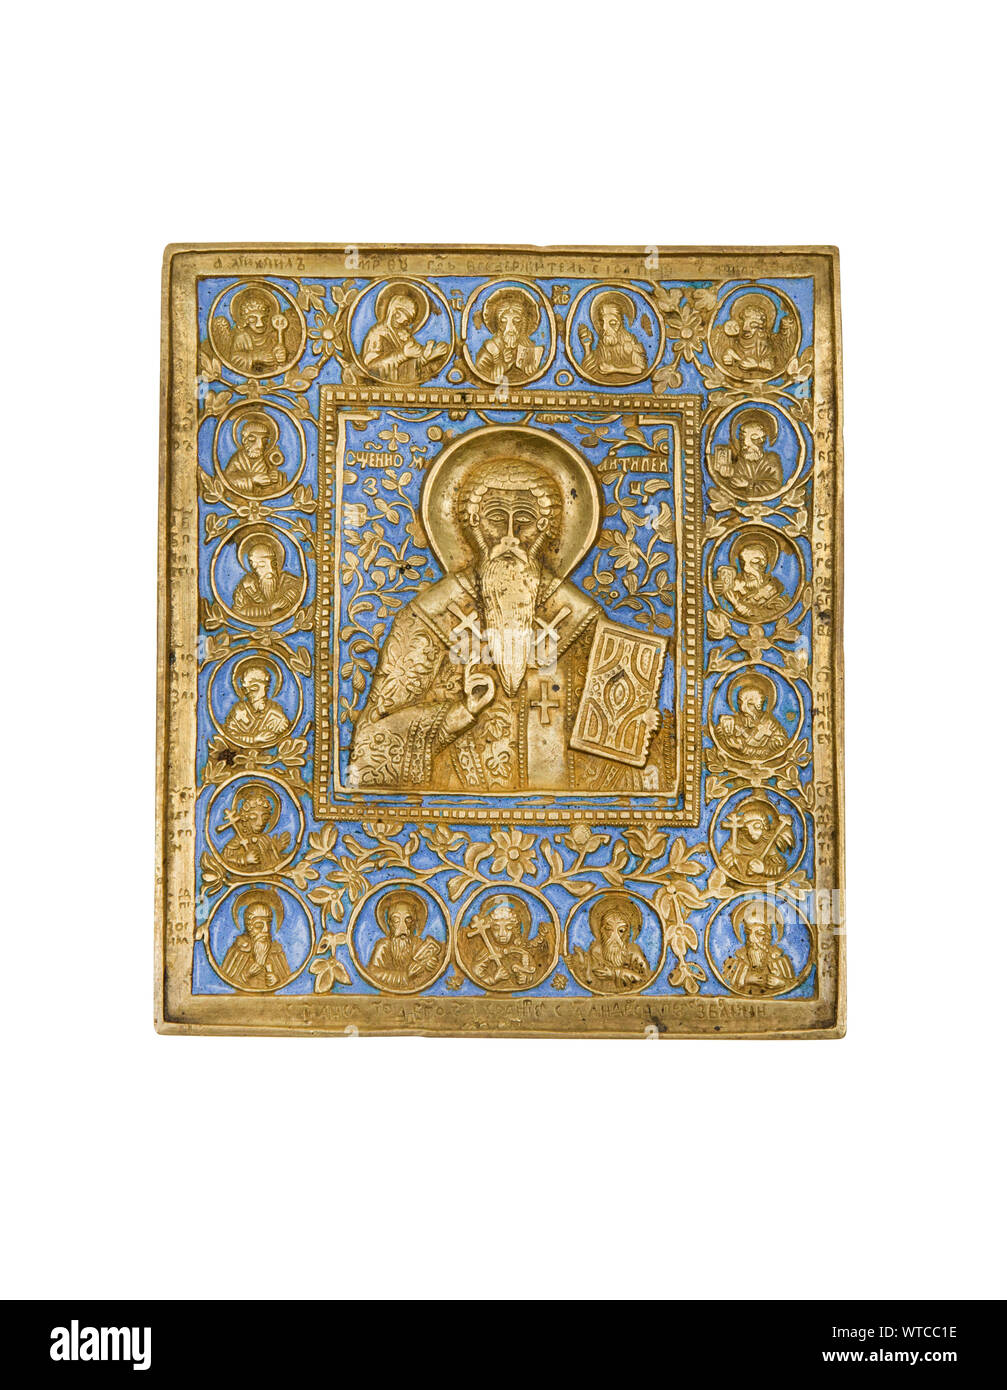 A fine Russian bronze and enamel icon depicting Saint Antipas believed to be the Antipas referred to in the Book of Revelation. Stock Photo